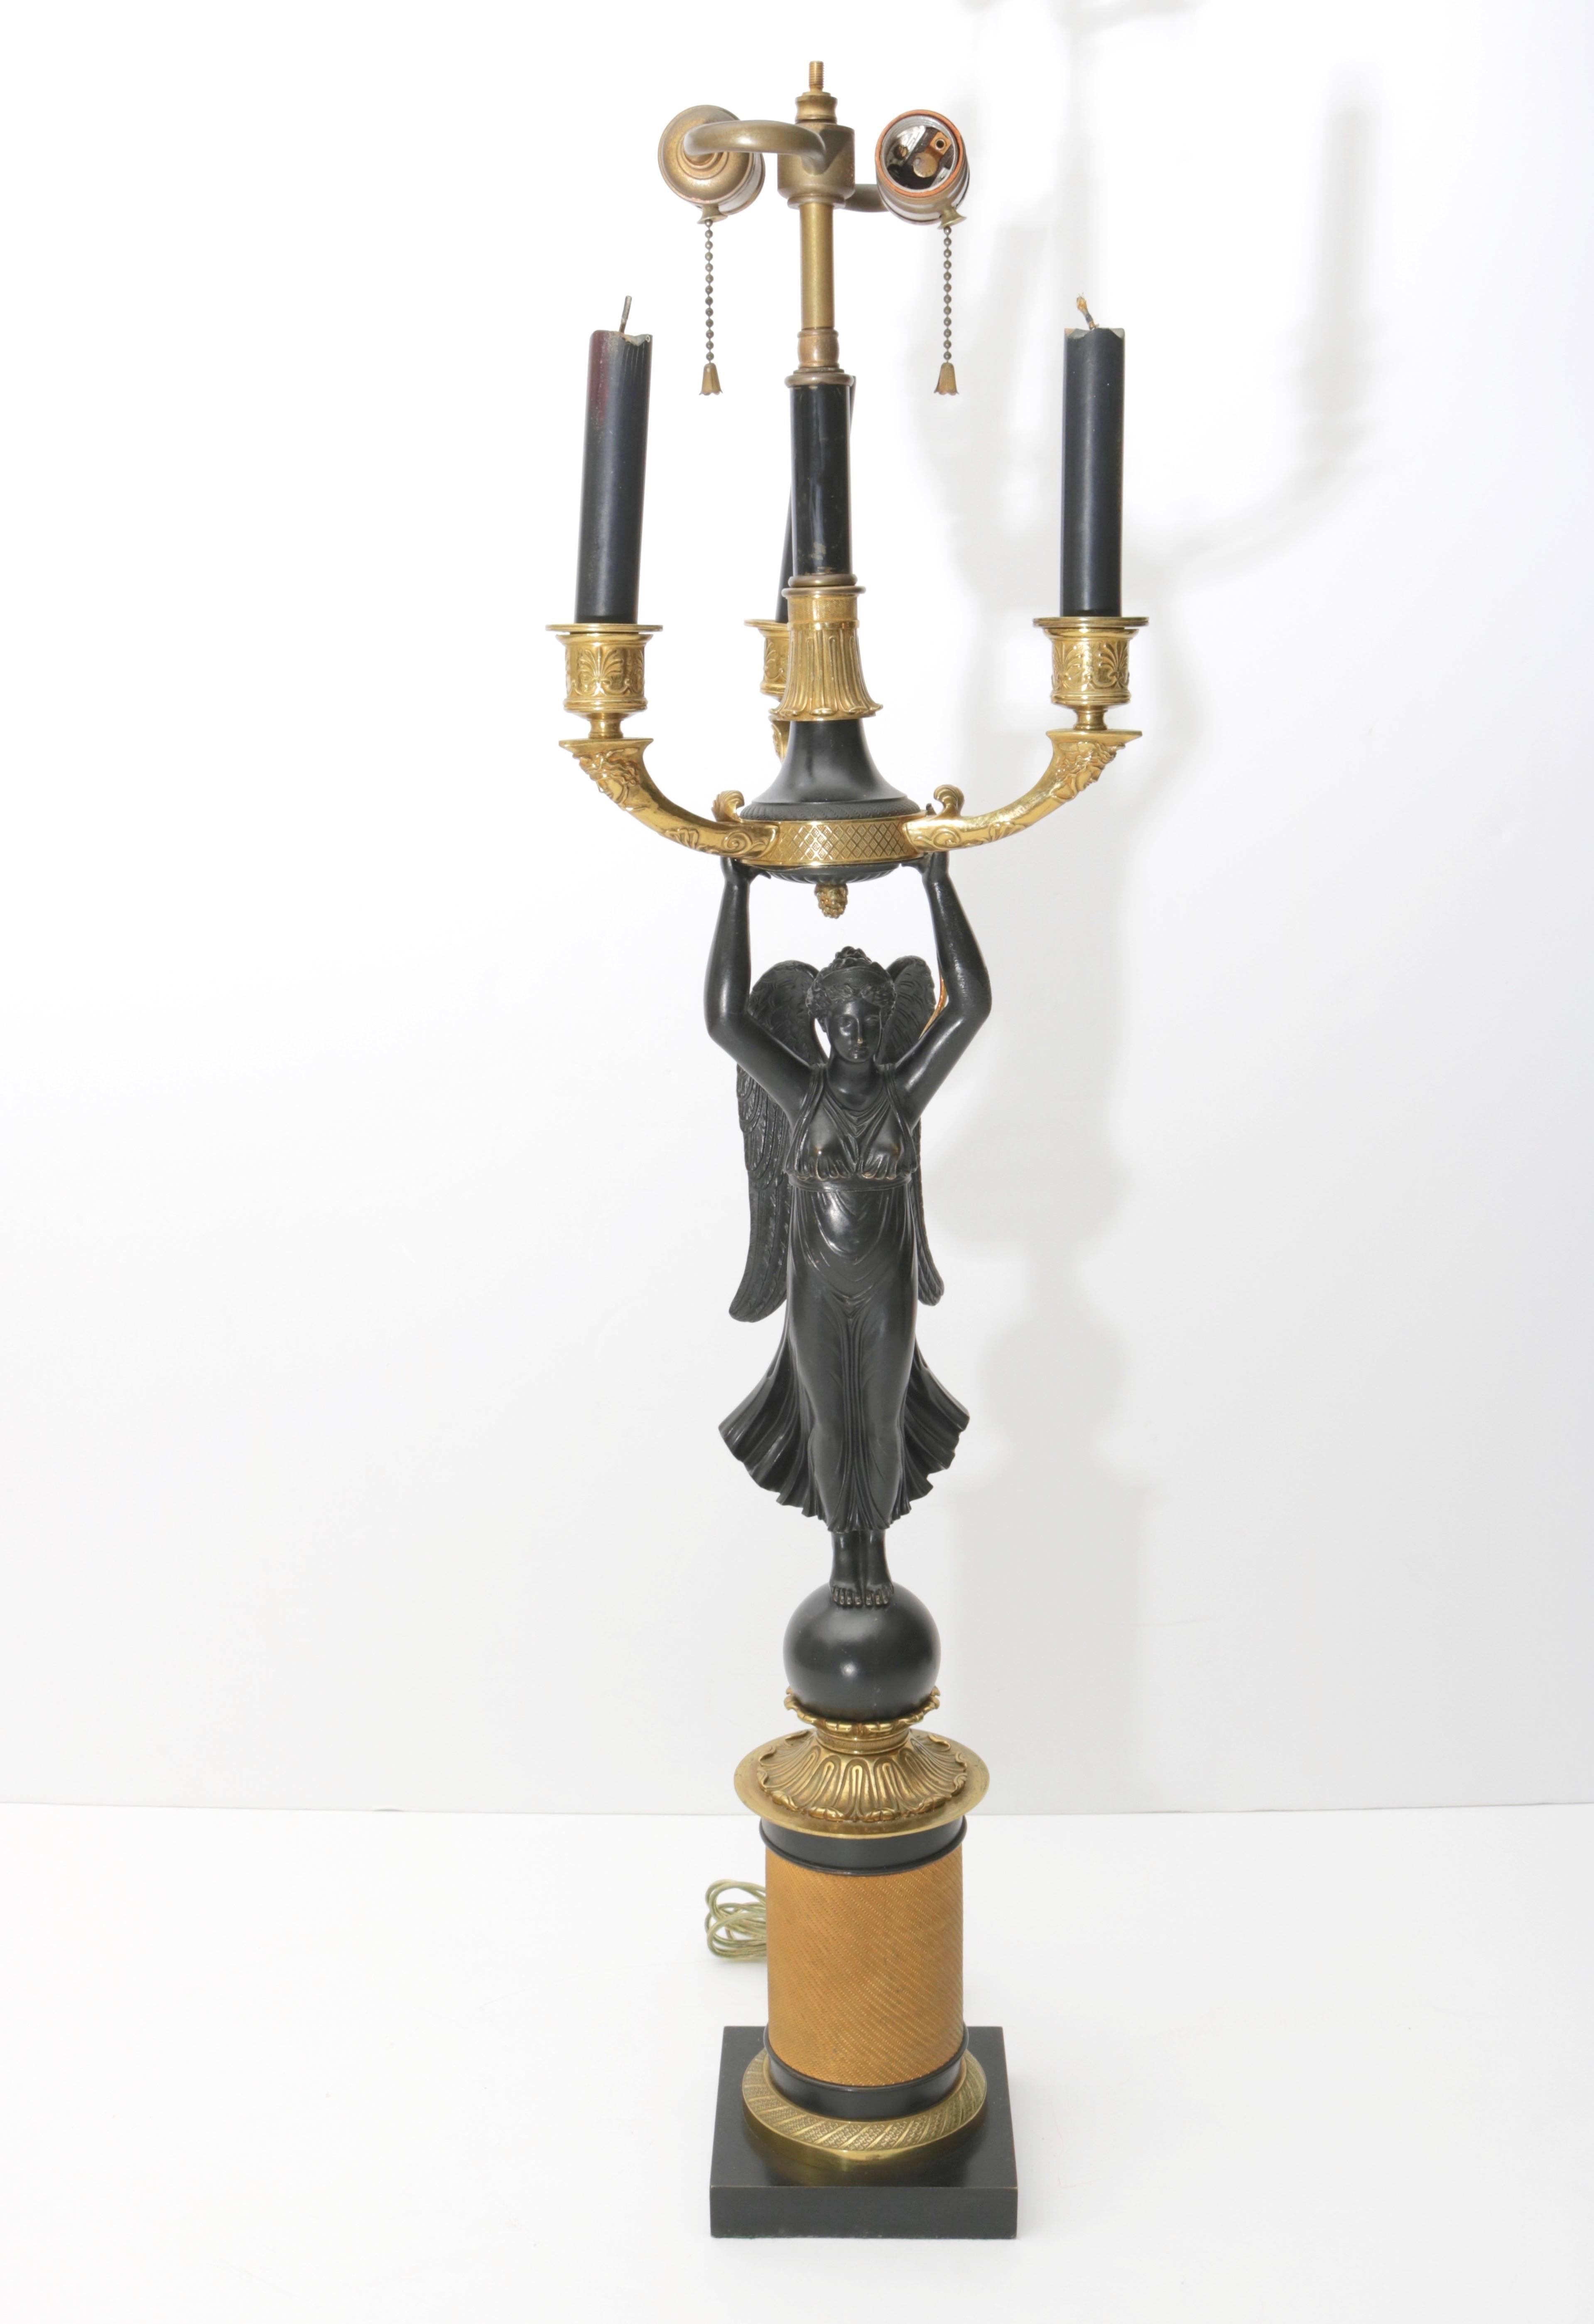 This stylish table lamp began its life as a candelabra and was converted to electric sometime in the 1940s. The piece is detailed with a central winged figure with upturned arms supporting three candle holders. The arms are detailed with the face of